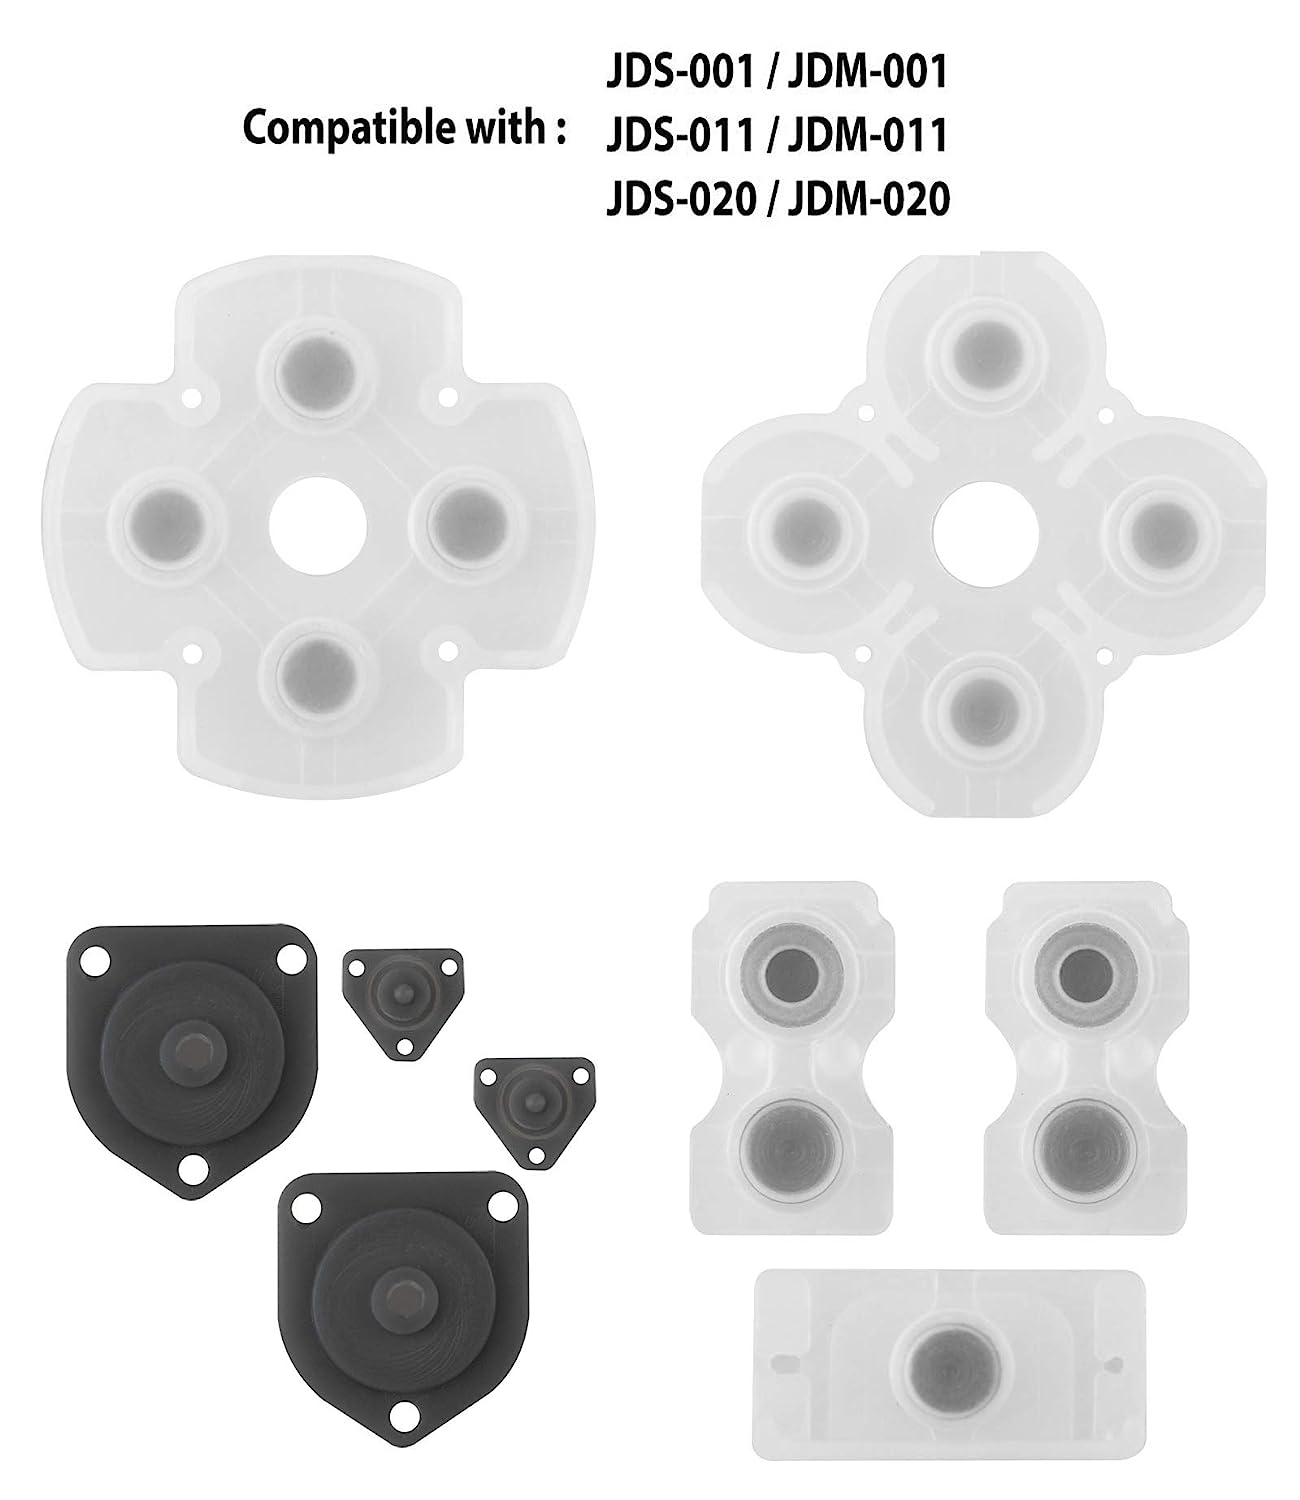 New World Replacement Conductive Rubber Pad Silicone Button Pads for Sony PS4 Play Station 4 Controller V1 JDM011 ,001